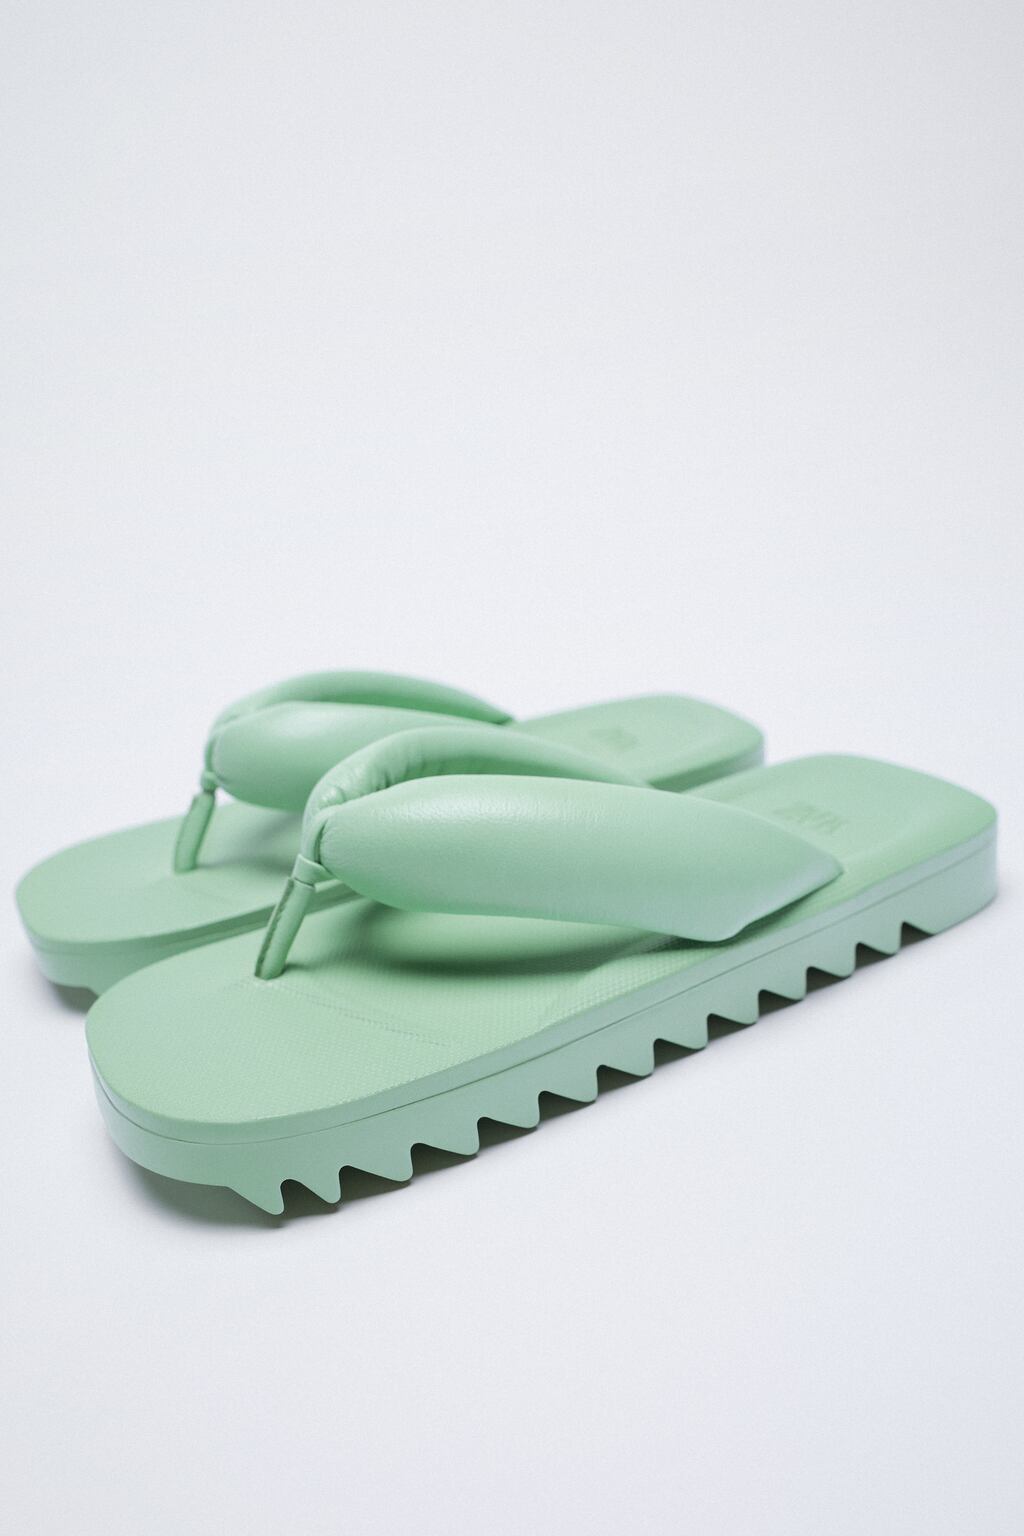 PADDED FLAT LEATHER SANDALS in green from Zara